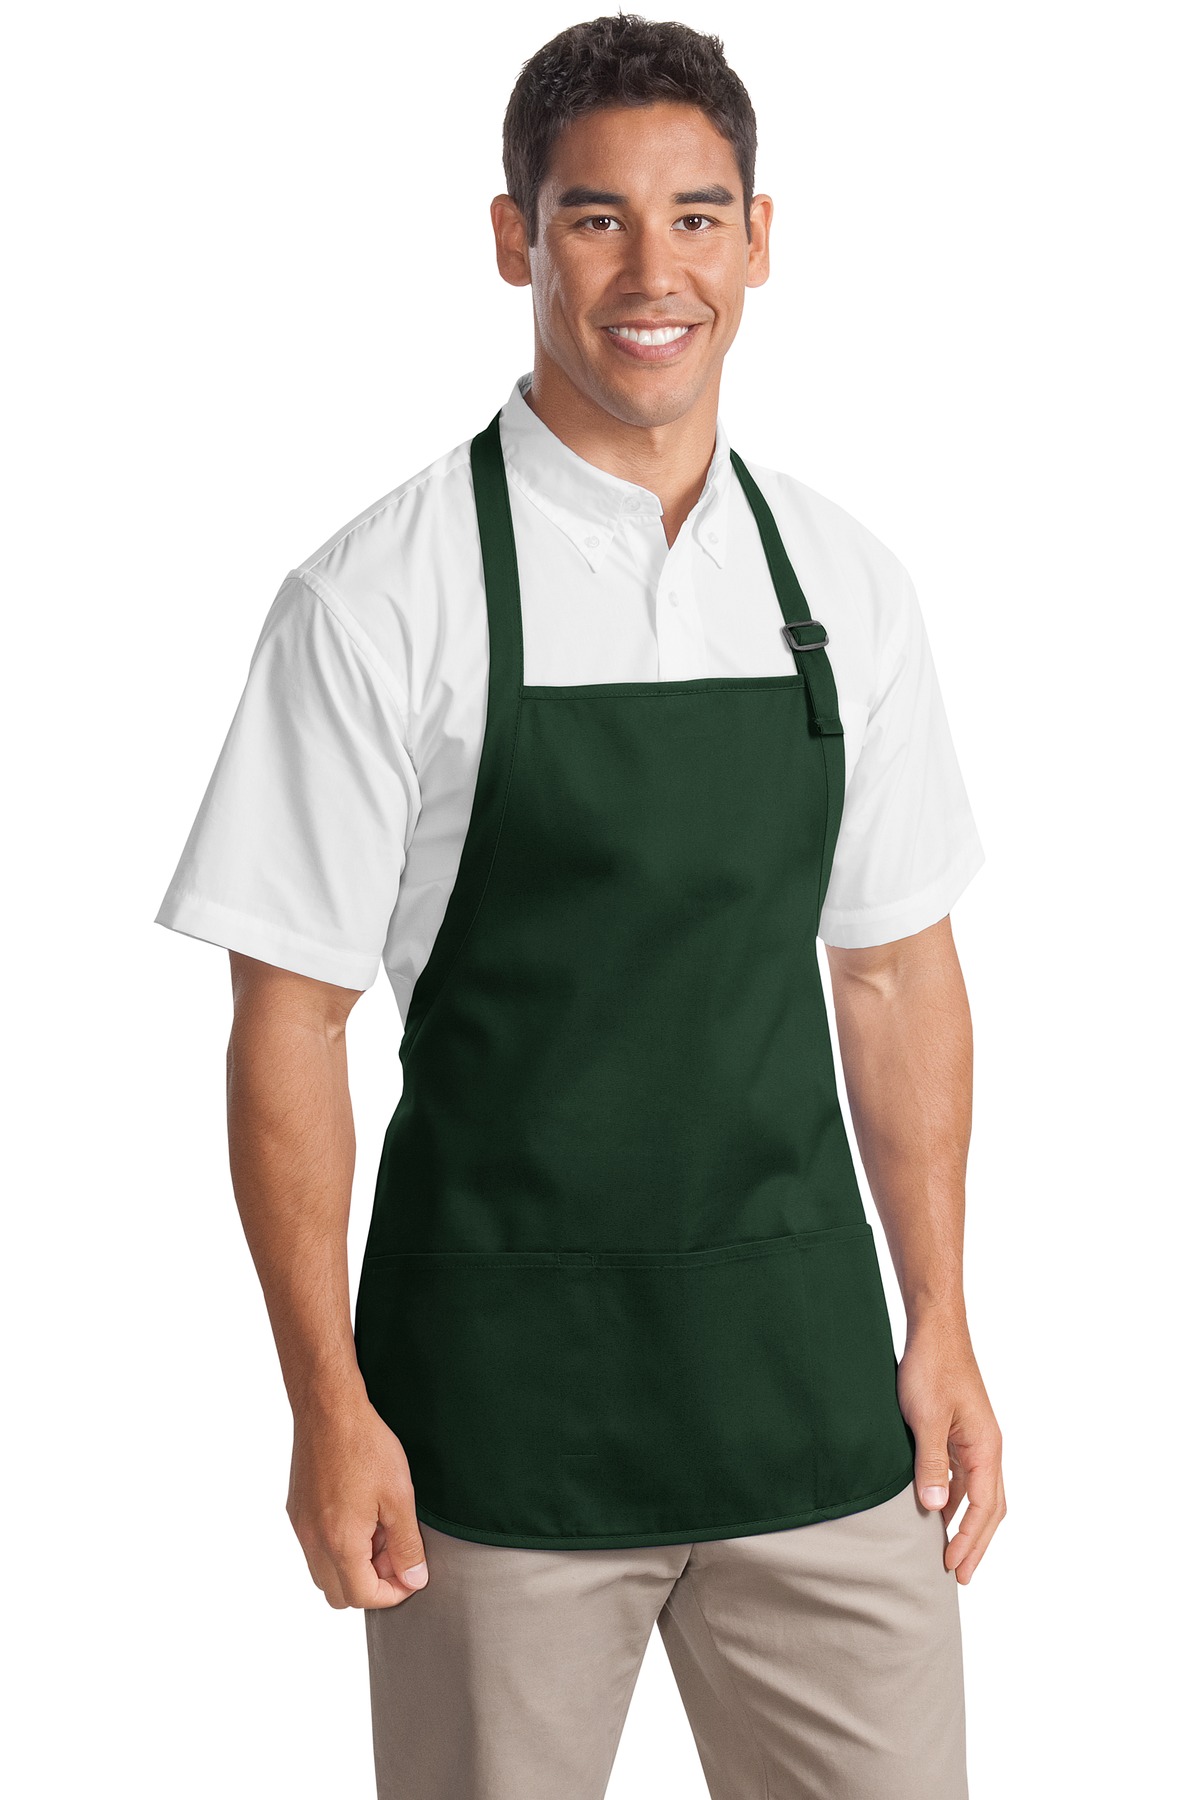 Port Authority Medium-Length Apron with Pouch Pockets.  A510